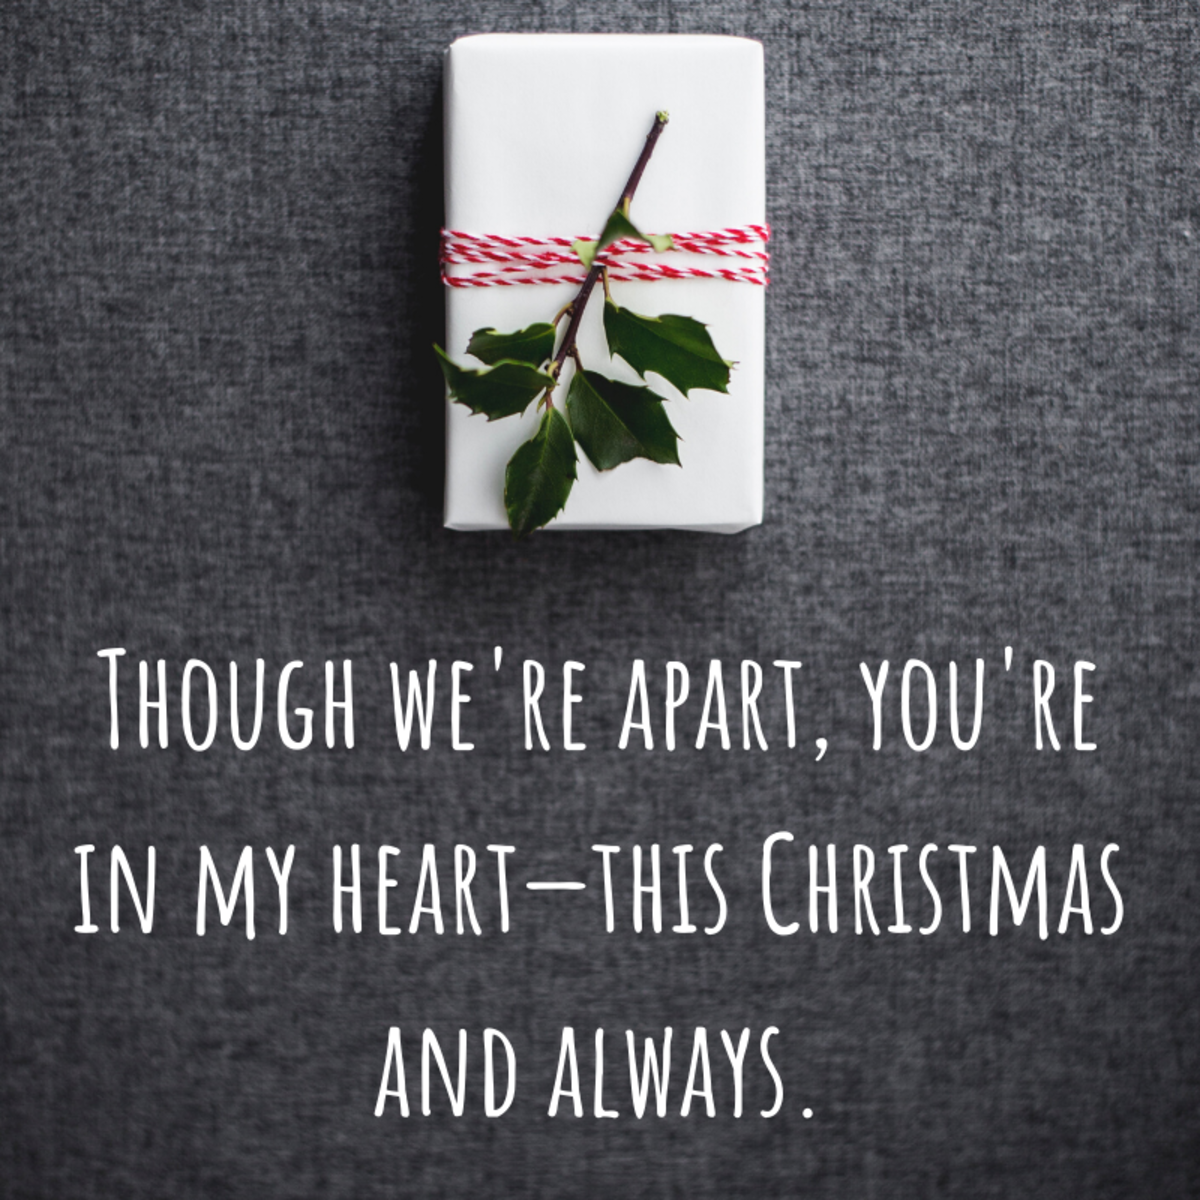 This sentimental saying would be perfect as a note sent with a gift to a long-distance friend or relative. 